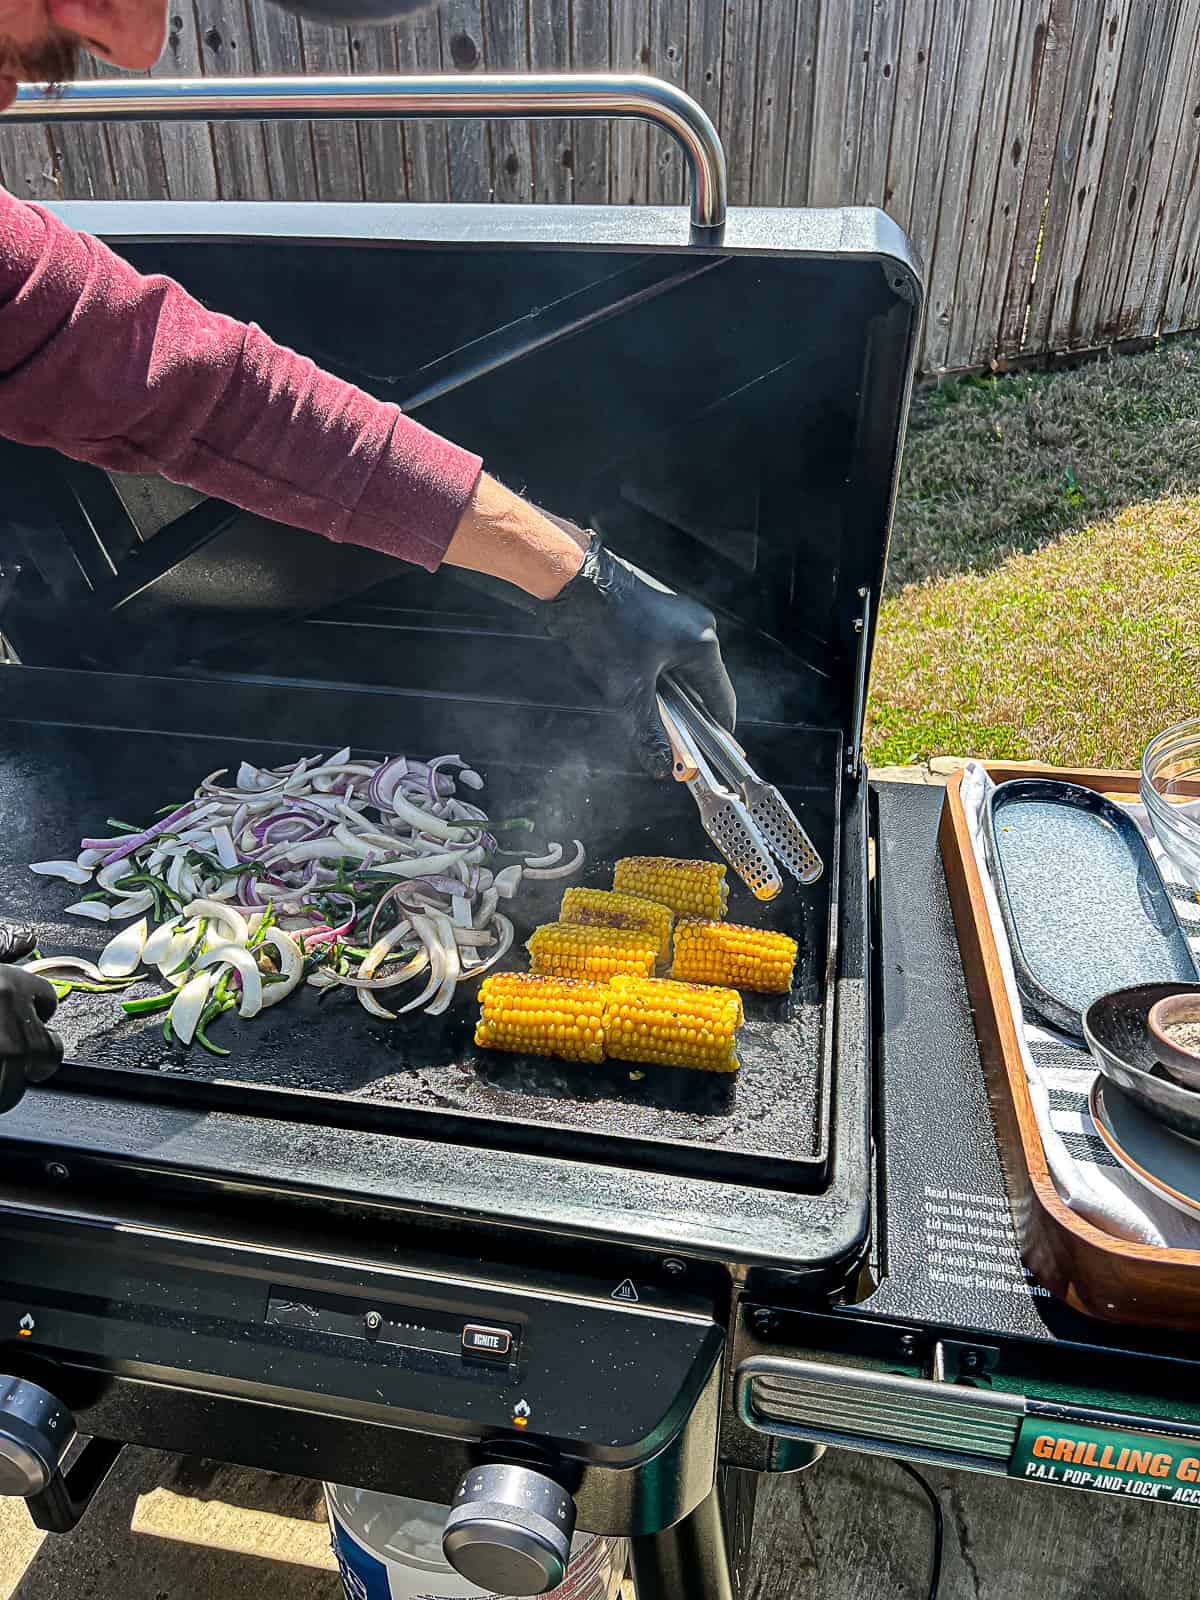 Griddle Cooking Corn On The Cob on Traeger Flatrock Grill with Griddled Onions And Peppers